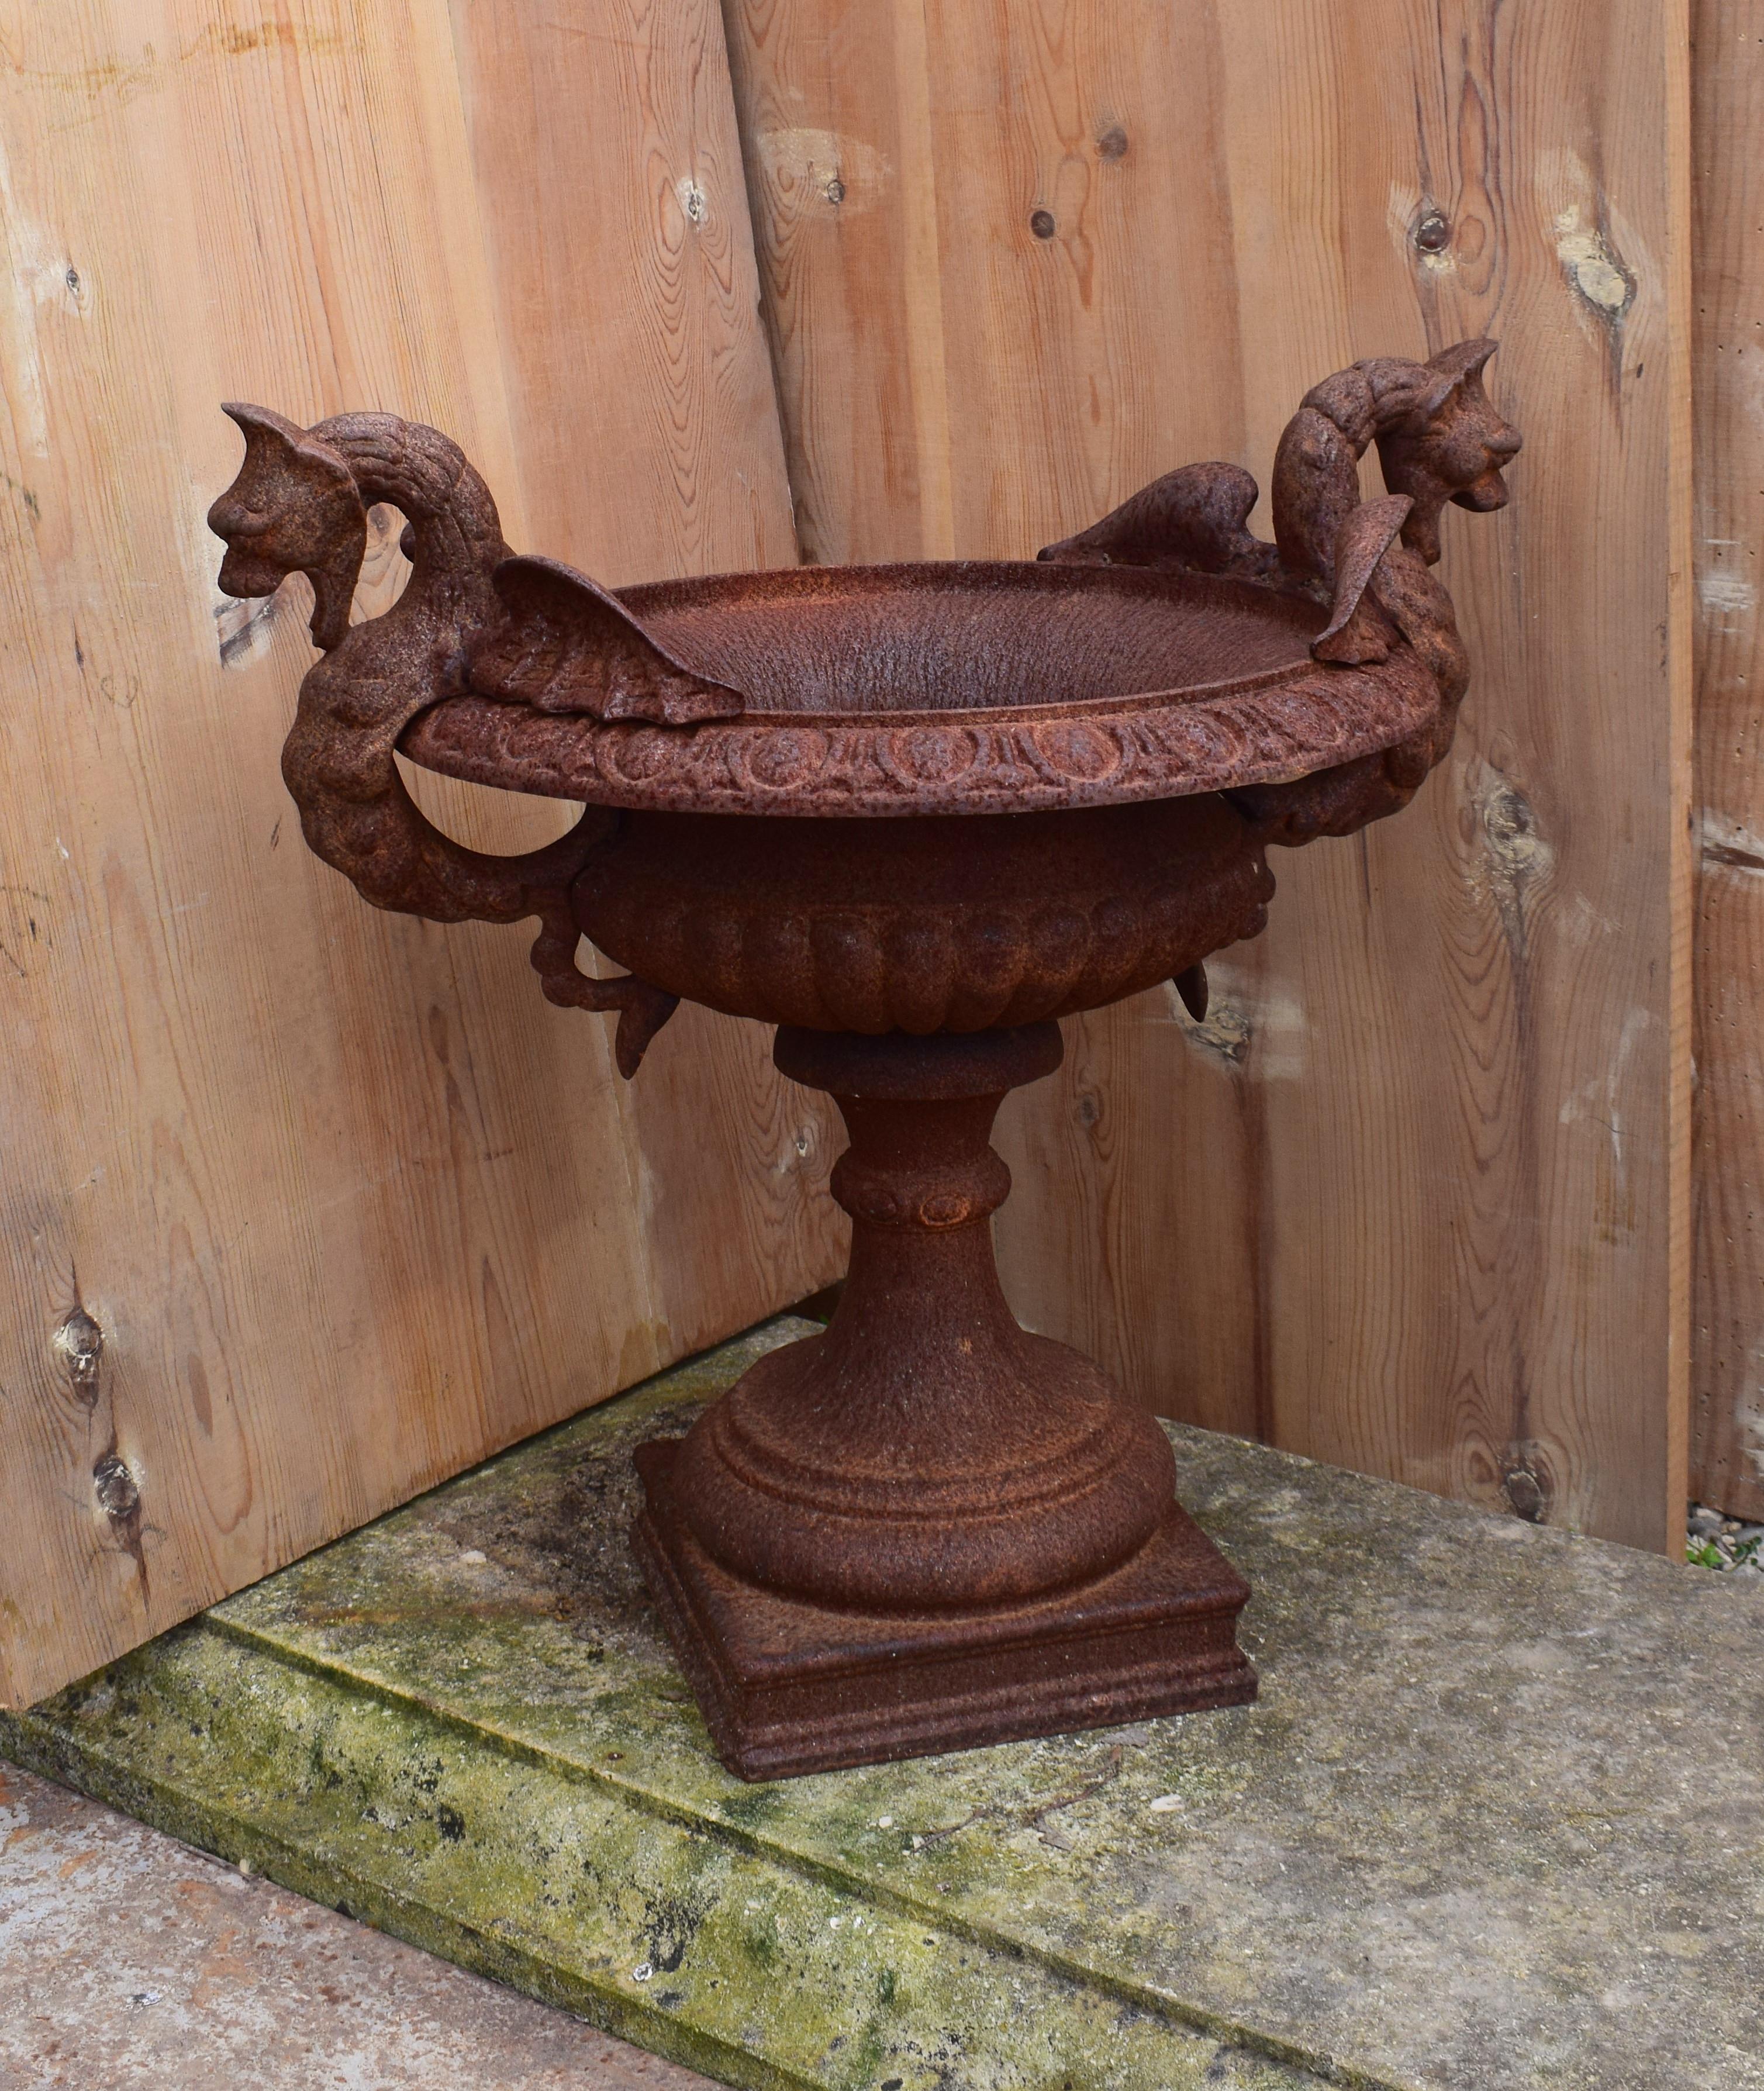 A 19th century heavy cast iron tazza shaped French garden urn. It has a fluted body that is placed upon a square pedestal base. The rim is decorated in an egg and dart pattern and with handles in a dragon design on either side of the urn. This